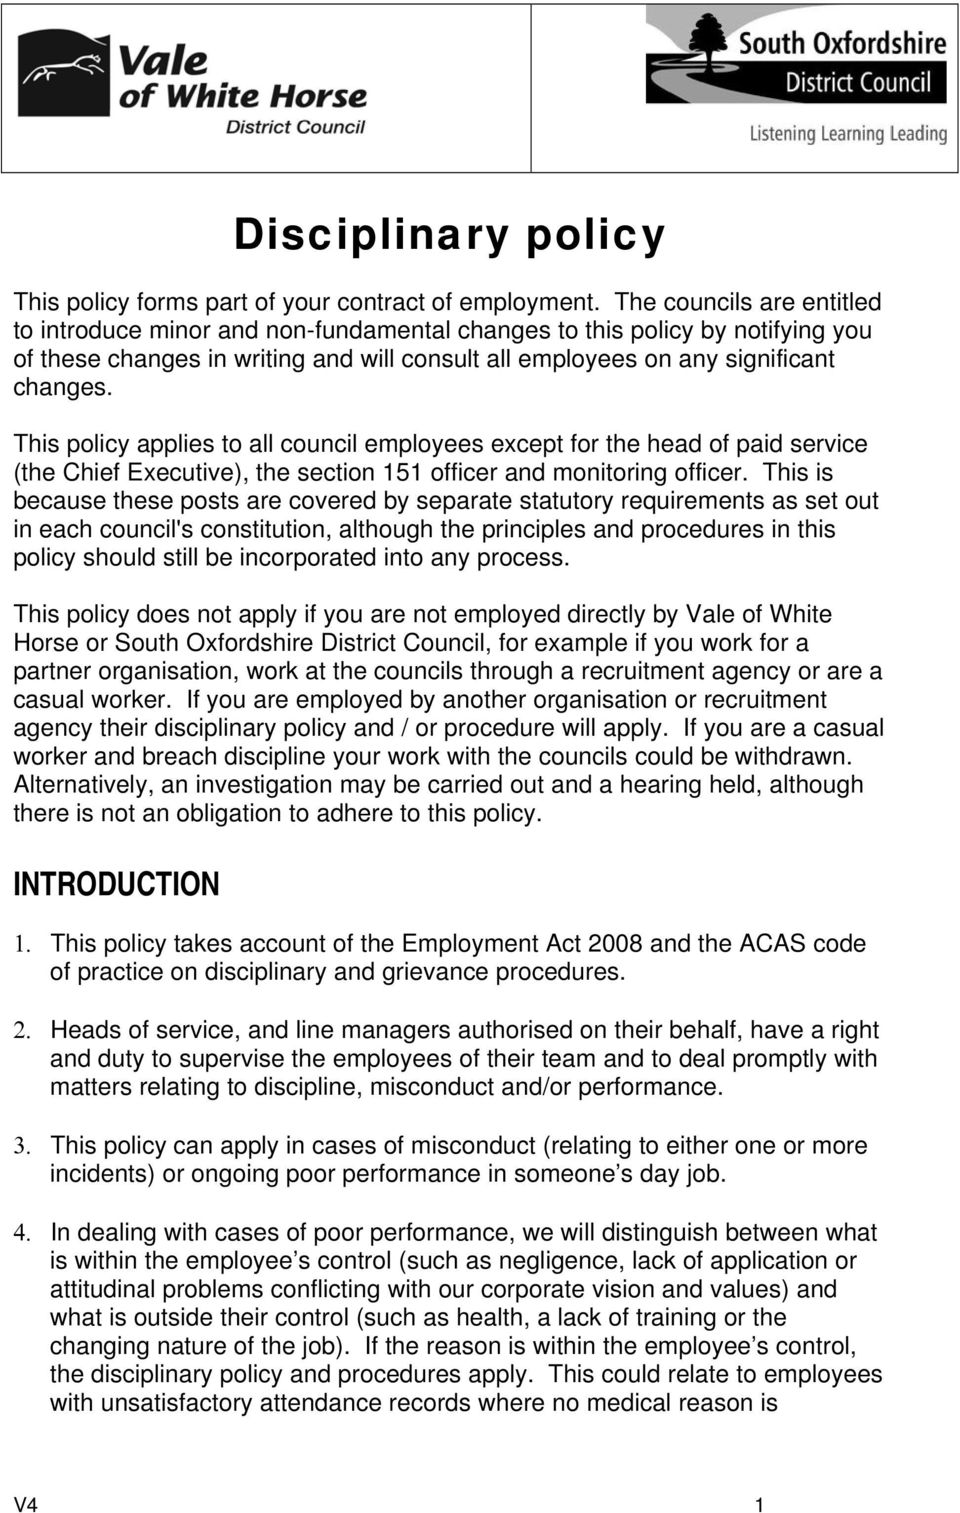 This policy applies to all council employees except for the head of paid service (the Chief Executive), the section 151 officer and monitoring officer.